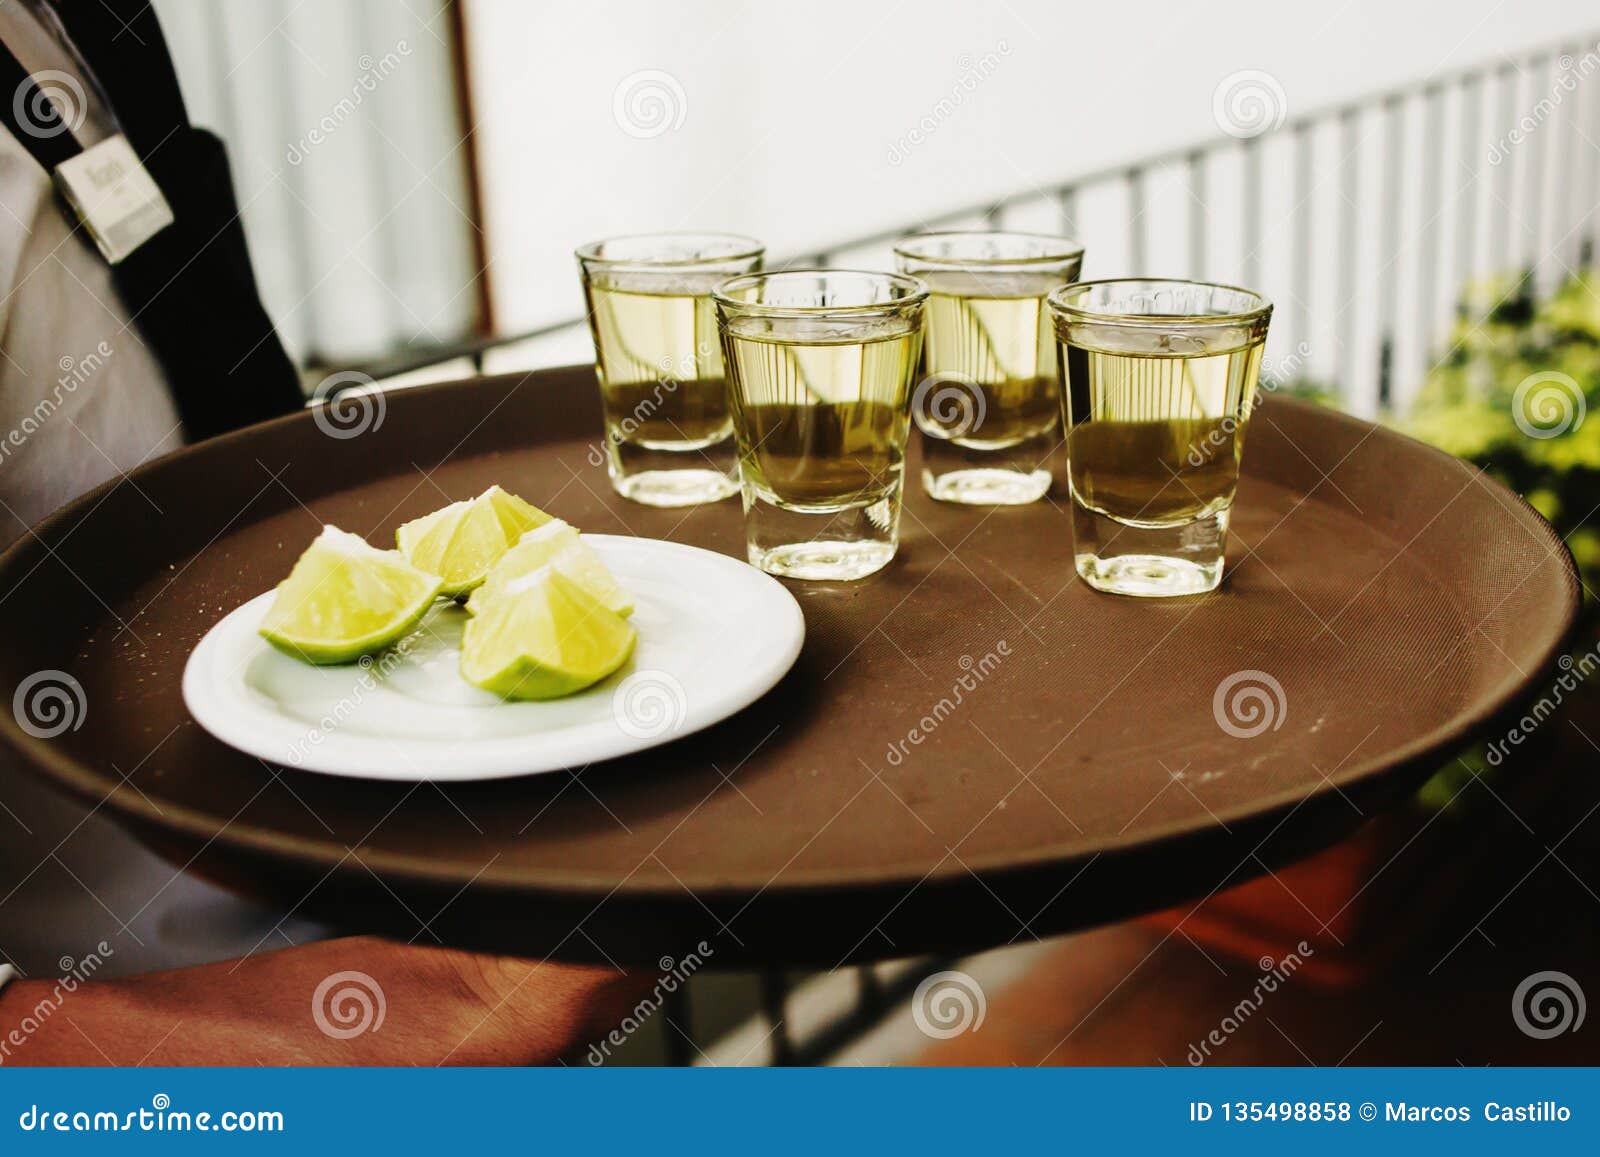 tequila shots mexican drink in mexico city